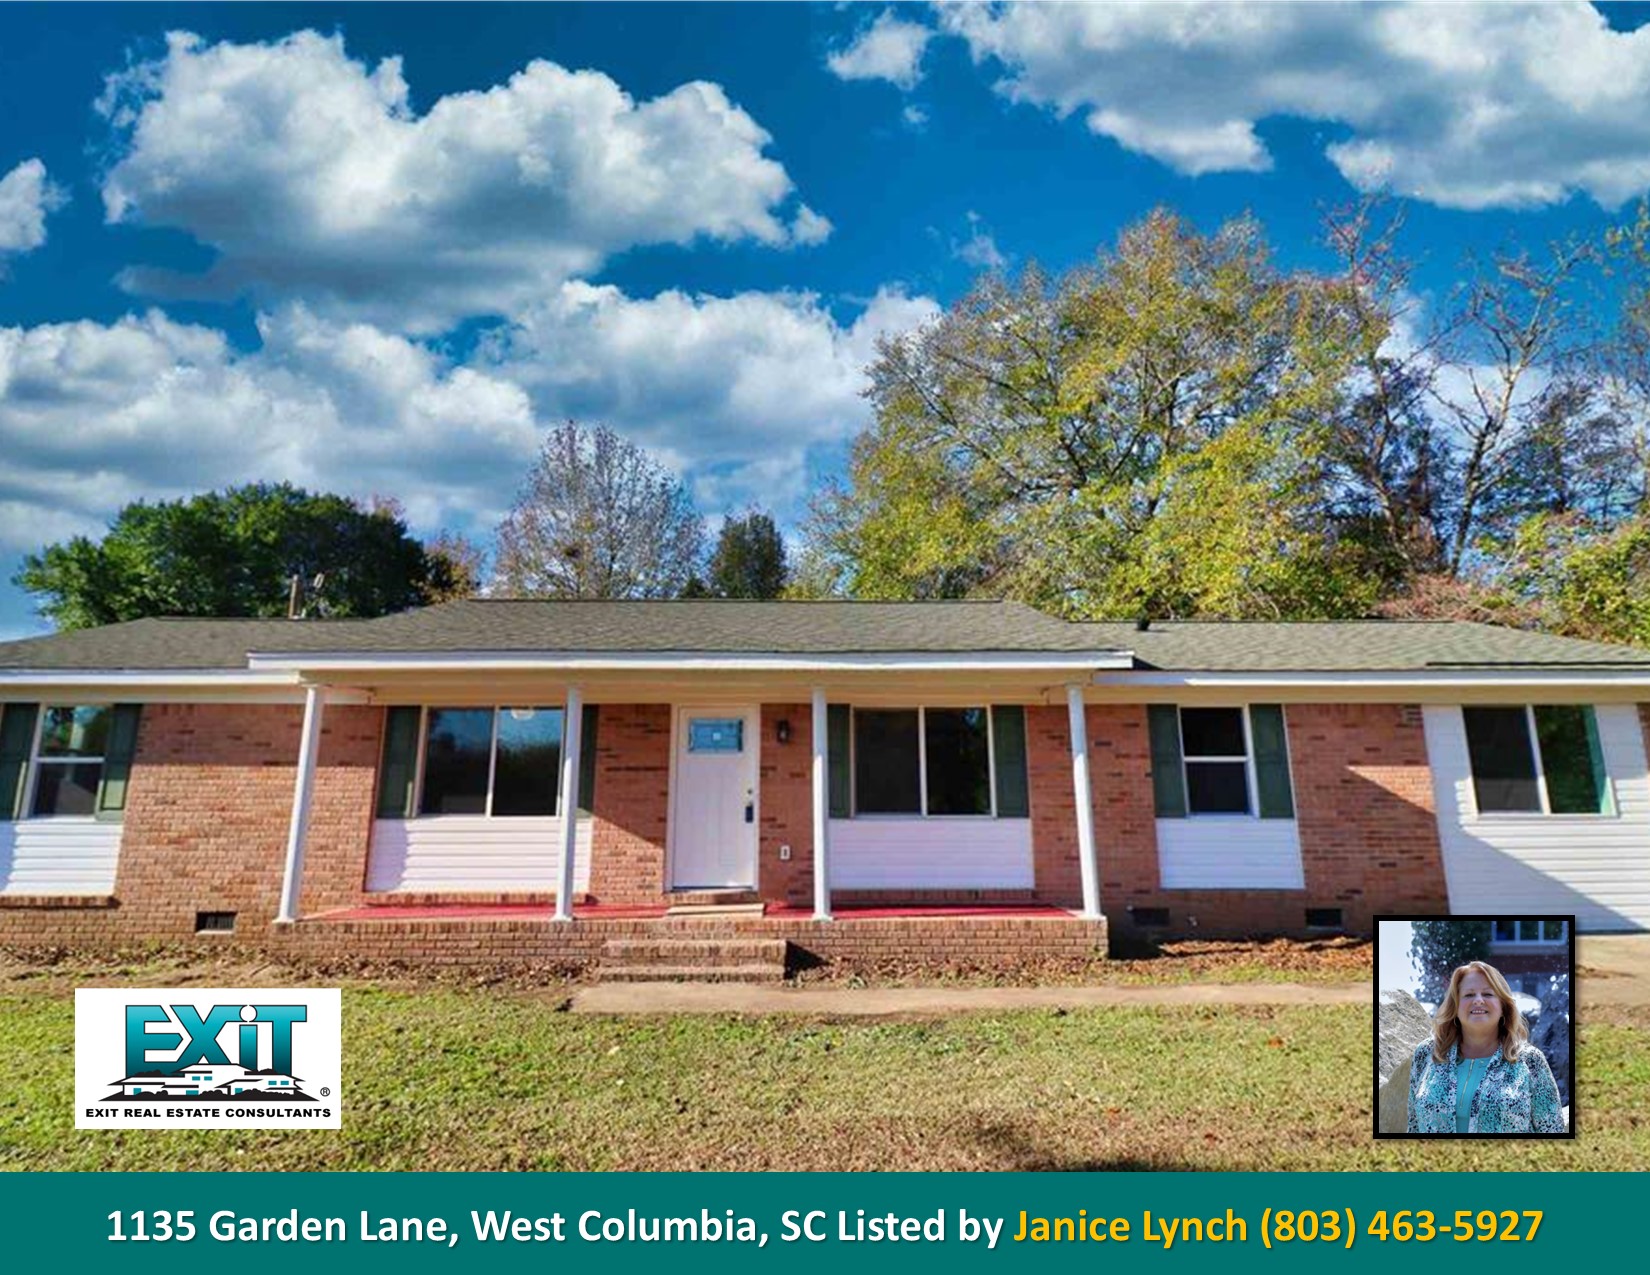 Just listed in Congaree Gardens